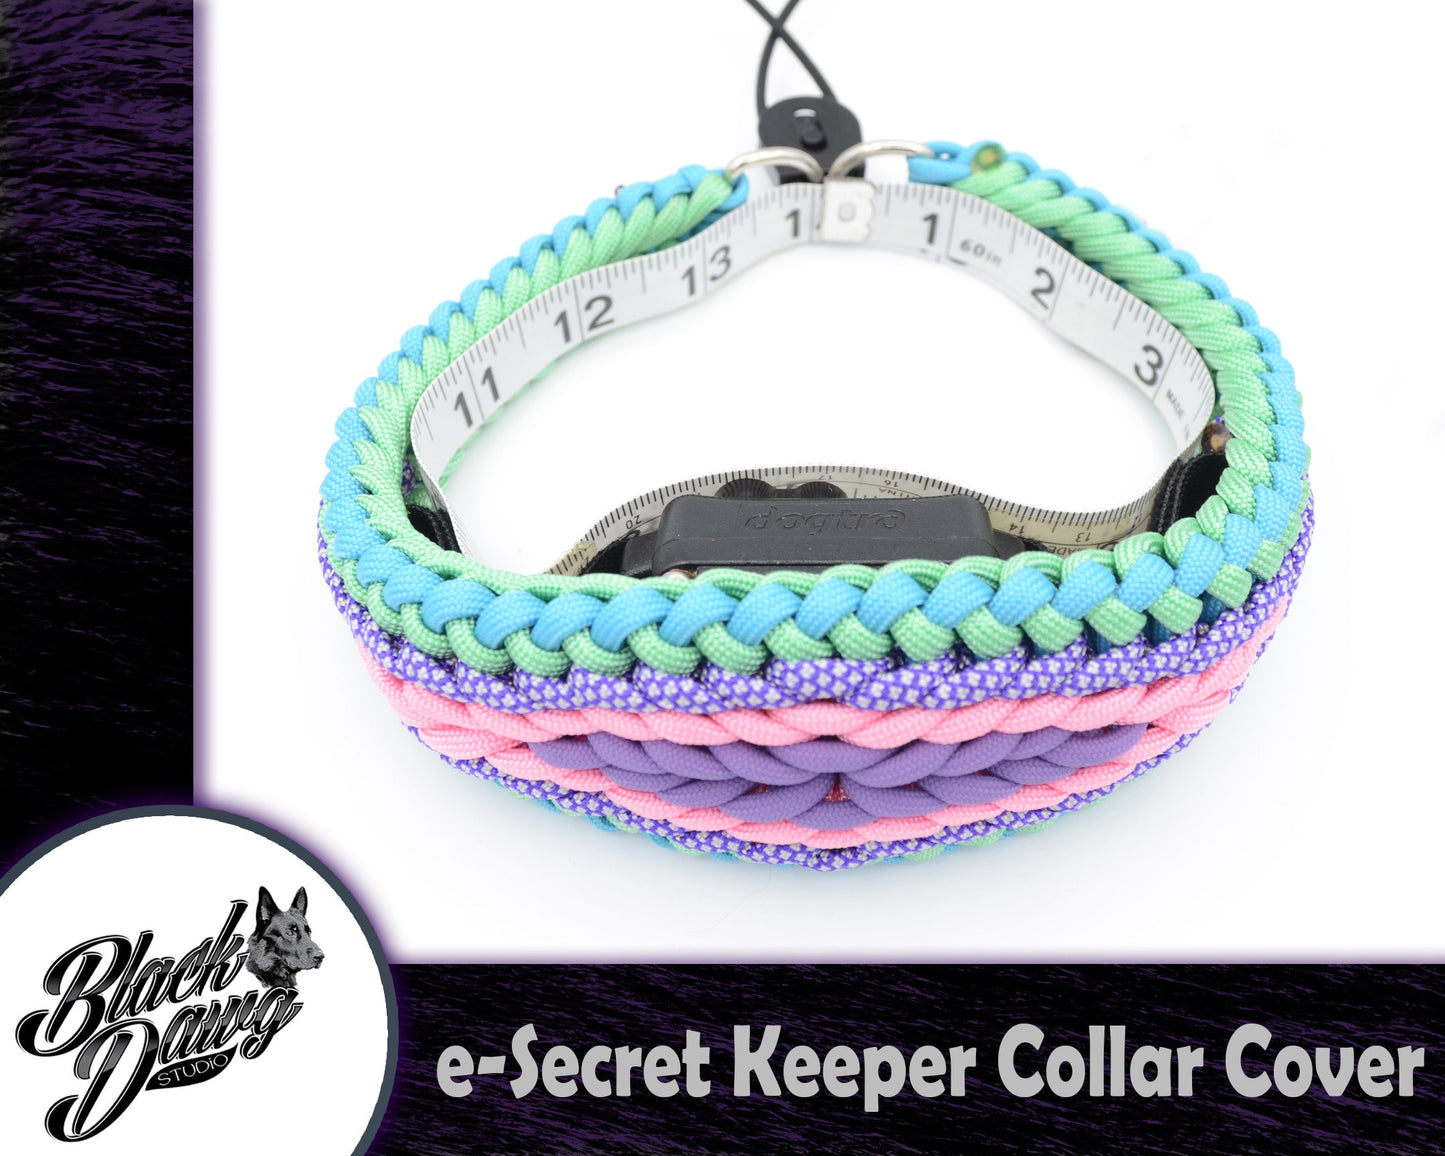 e-Secret Keeper Paracord Collar - Electric/Remote Training Collar Cover - Neon Turquoise, Honeycomb, Mint, Honeycomb, and Cream